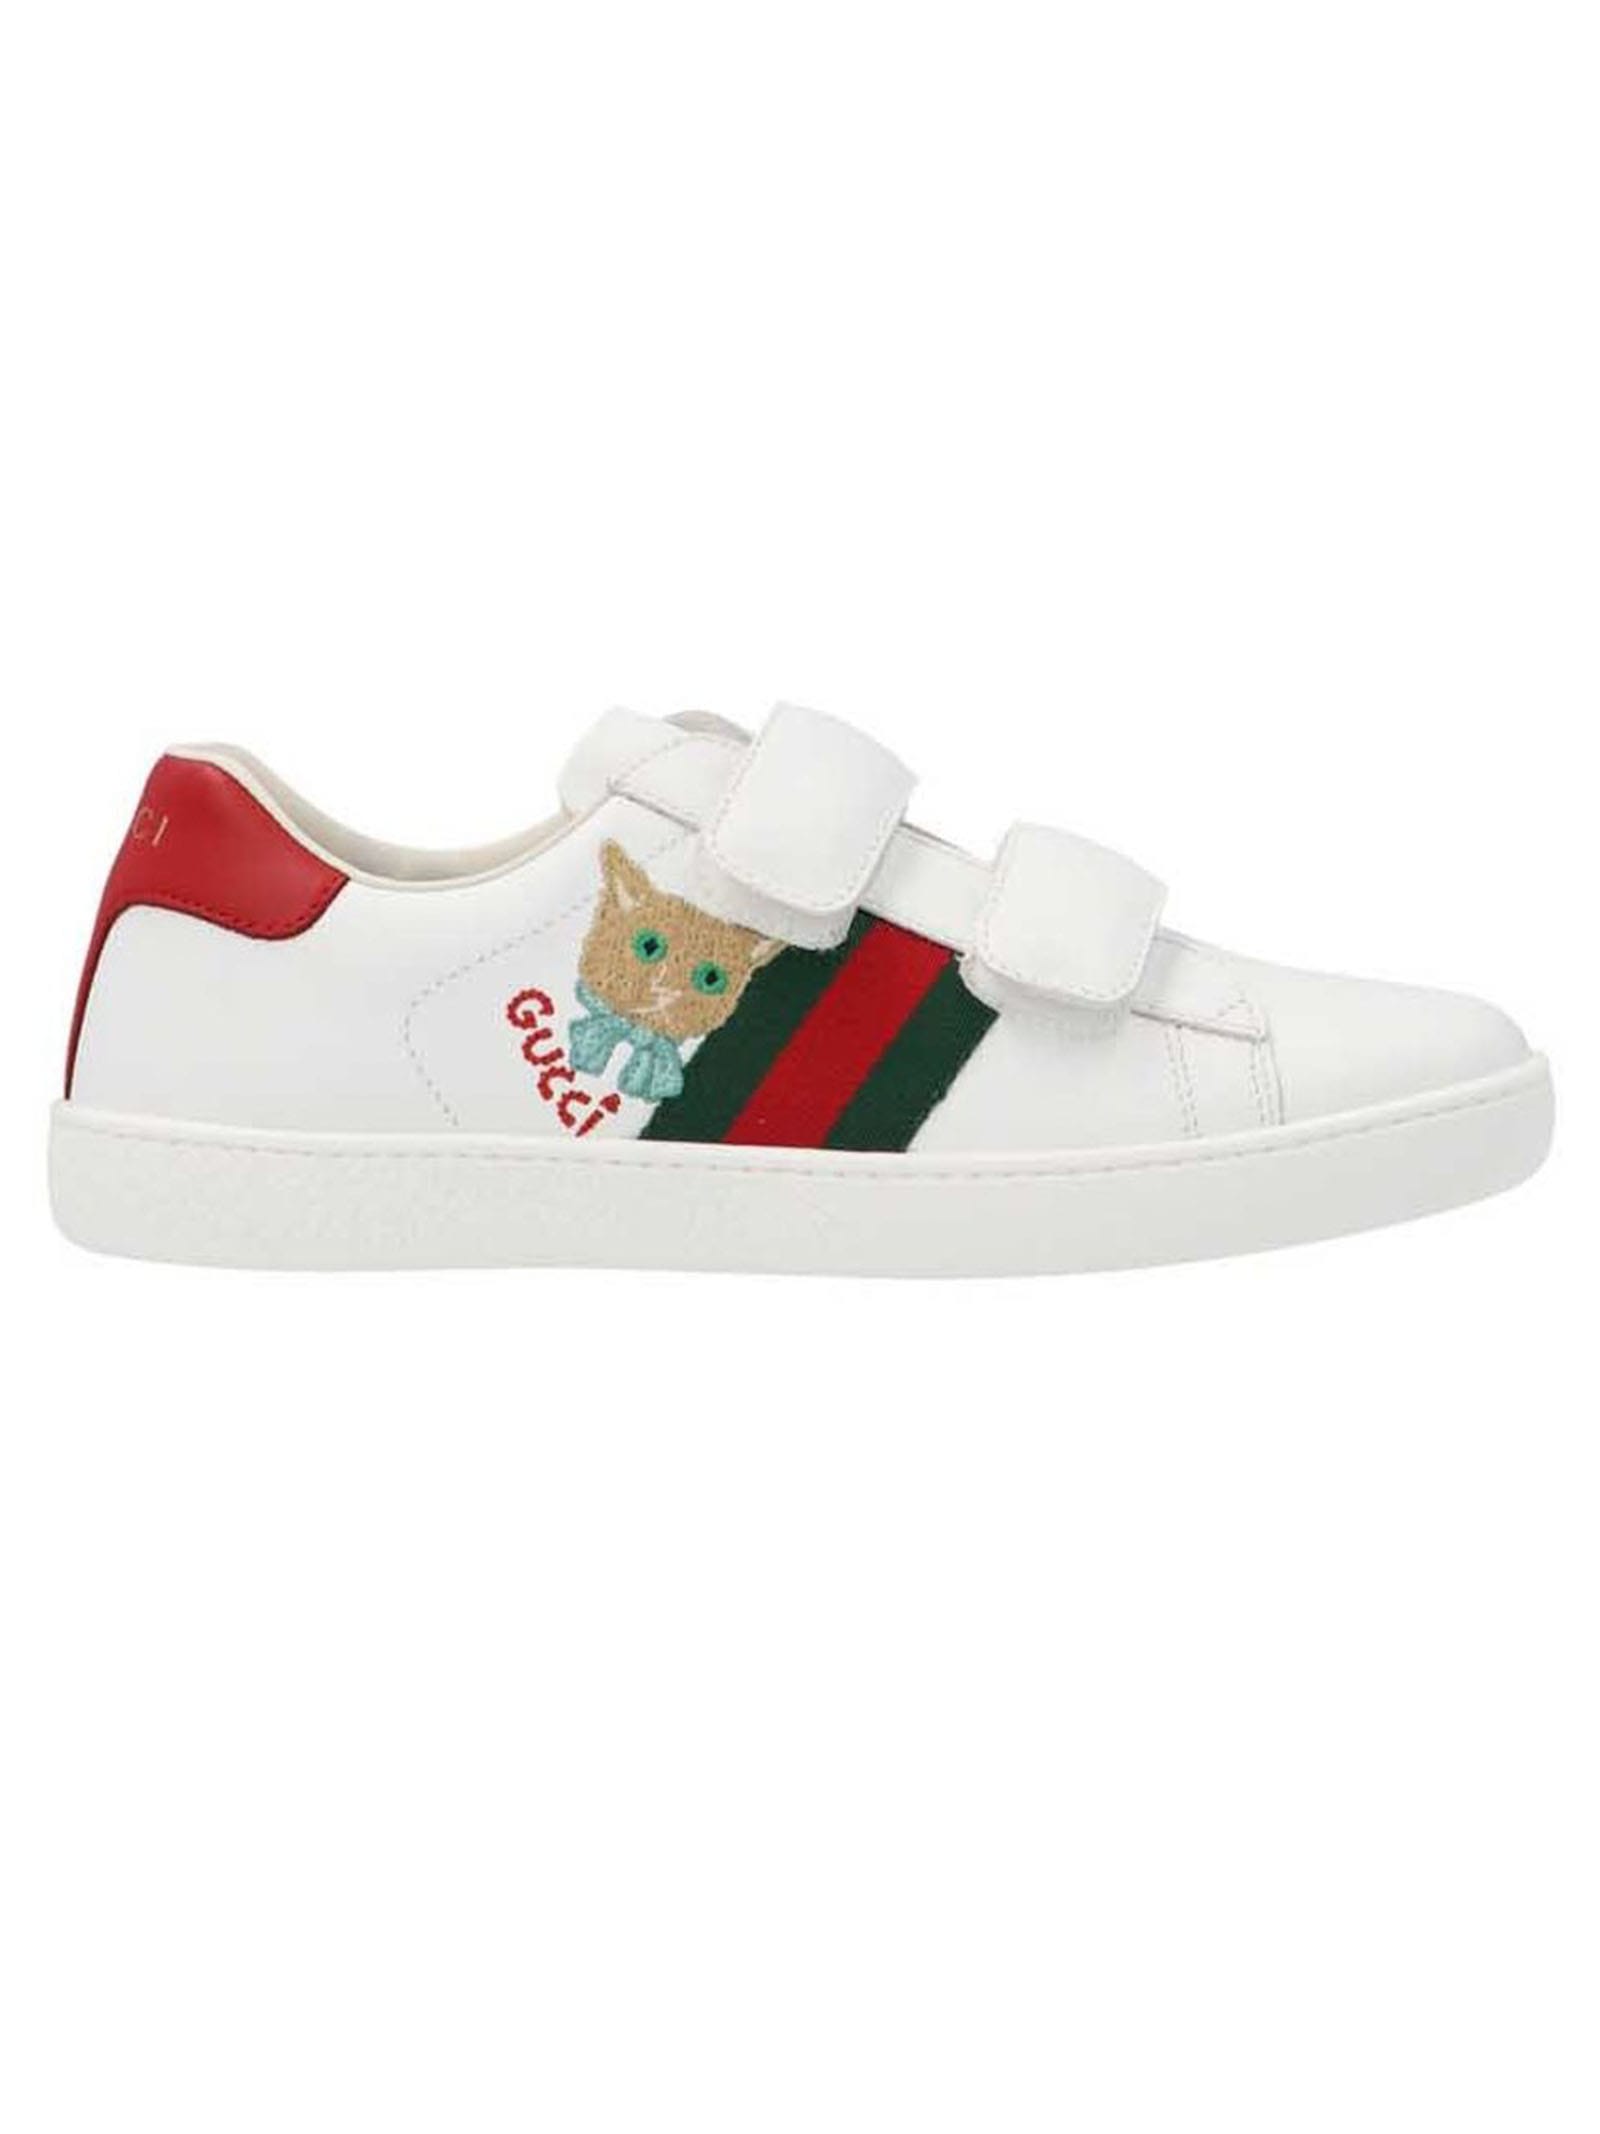 GUCCI CHILDRENS ACE SNEAKER,666370CPWB0 9082